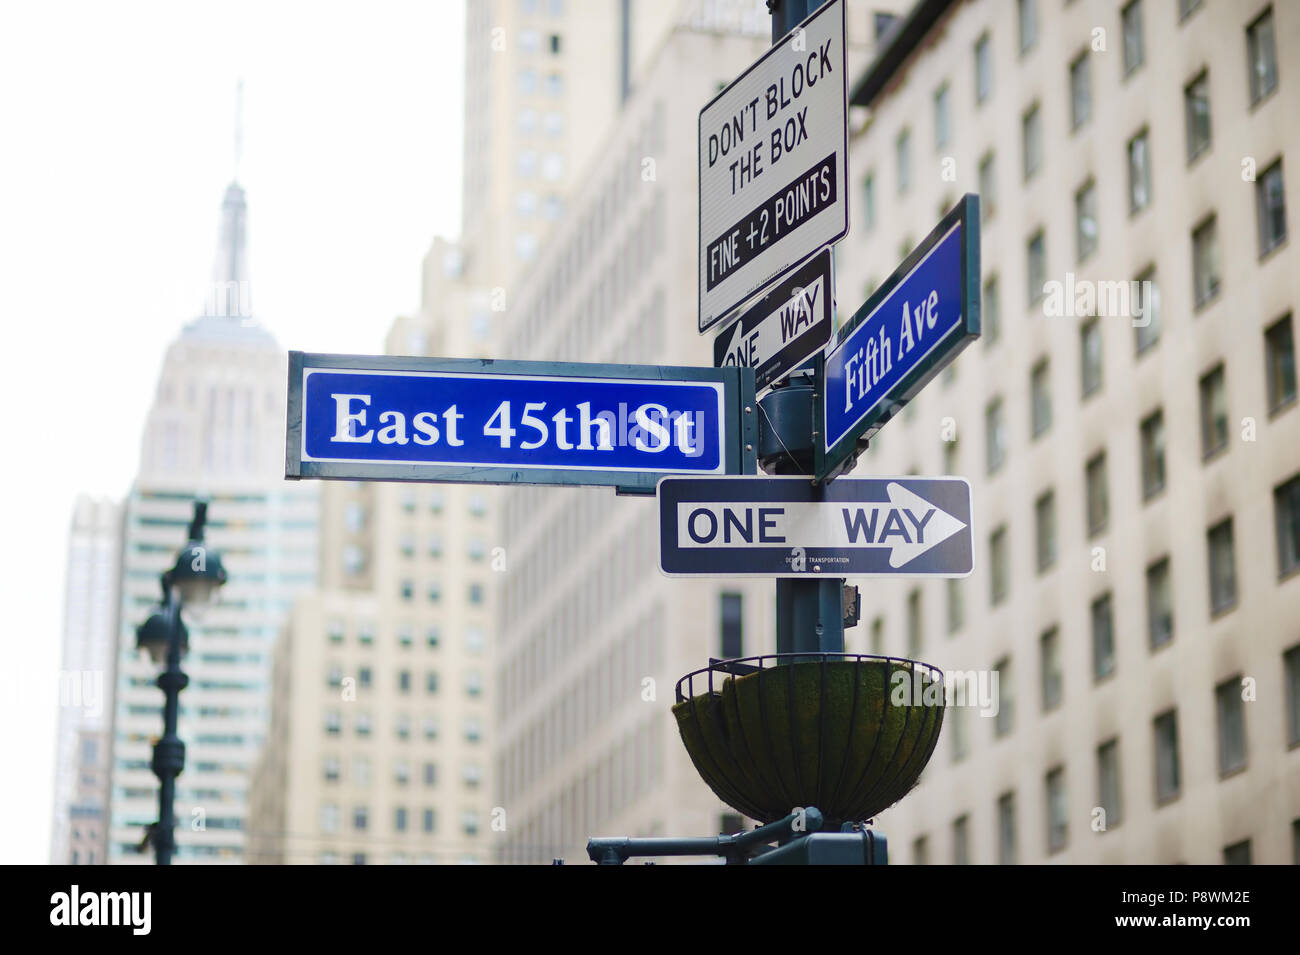 Intersection of East 45th street and 5th Ave in New York City Stock Photo